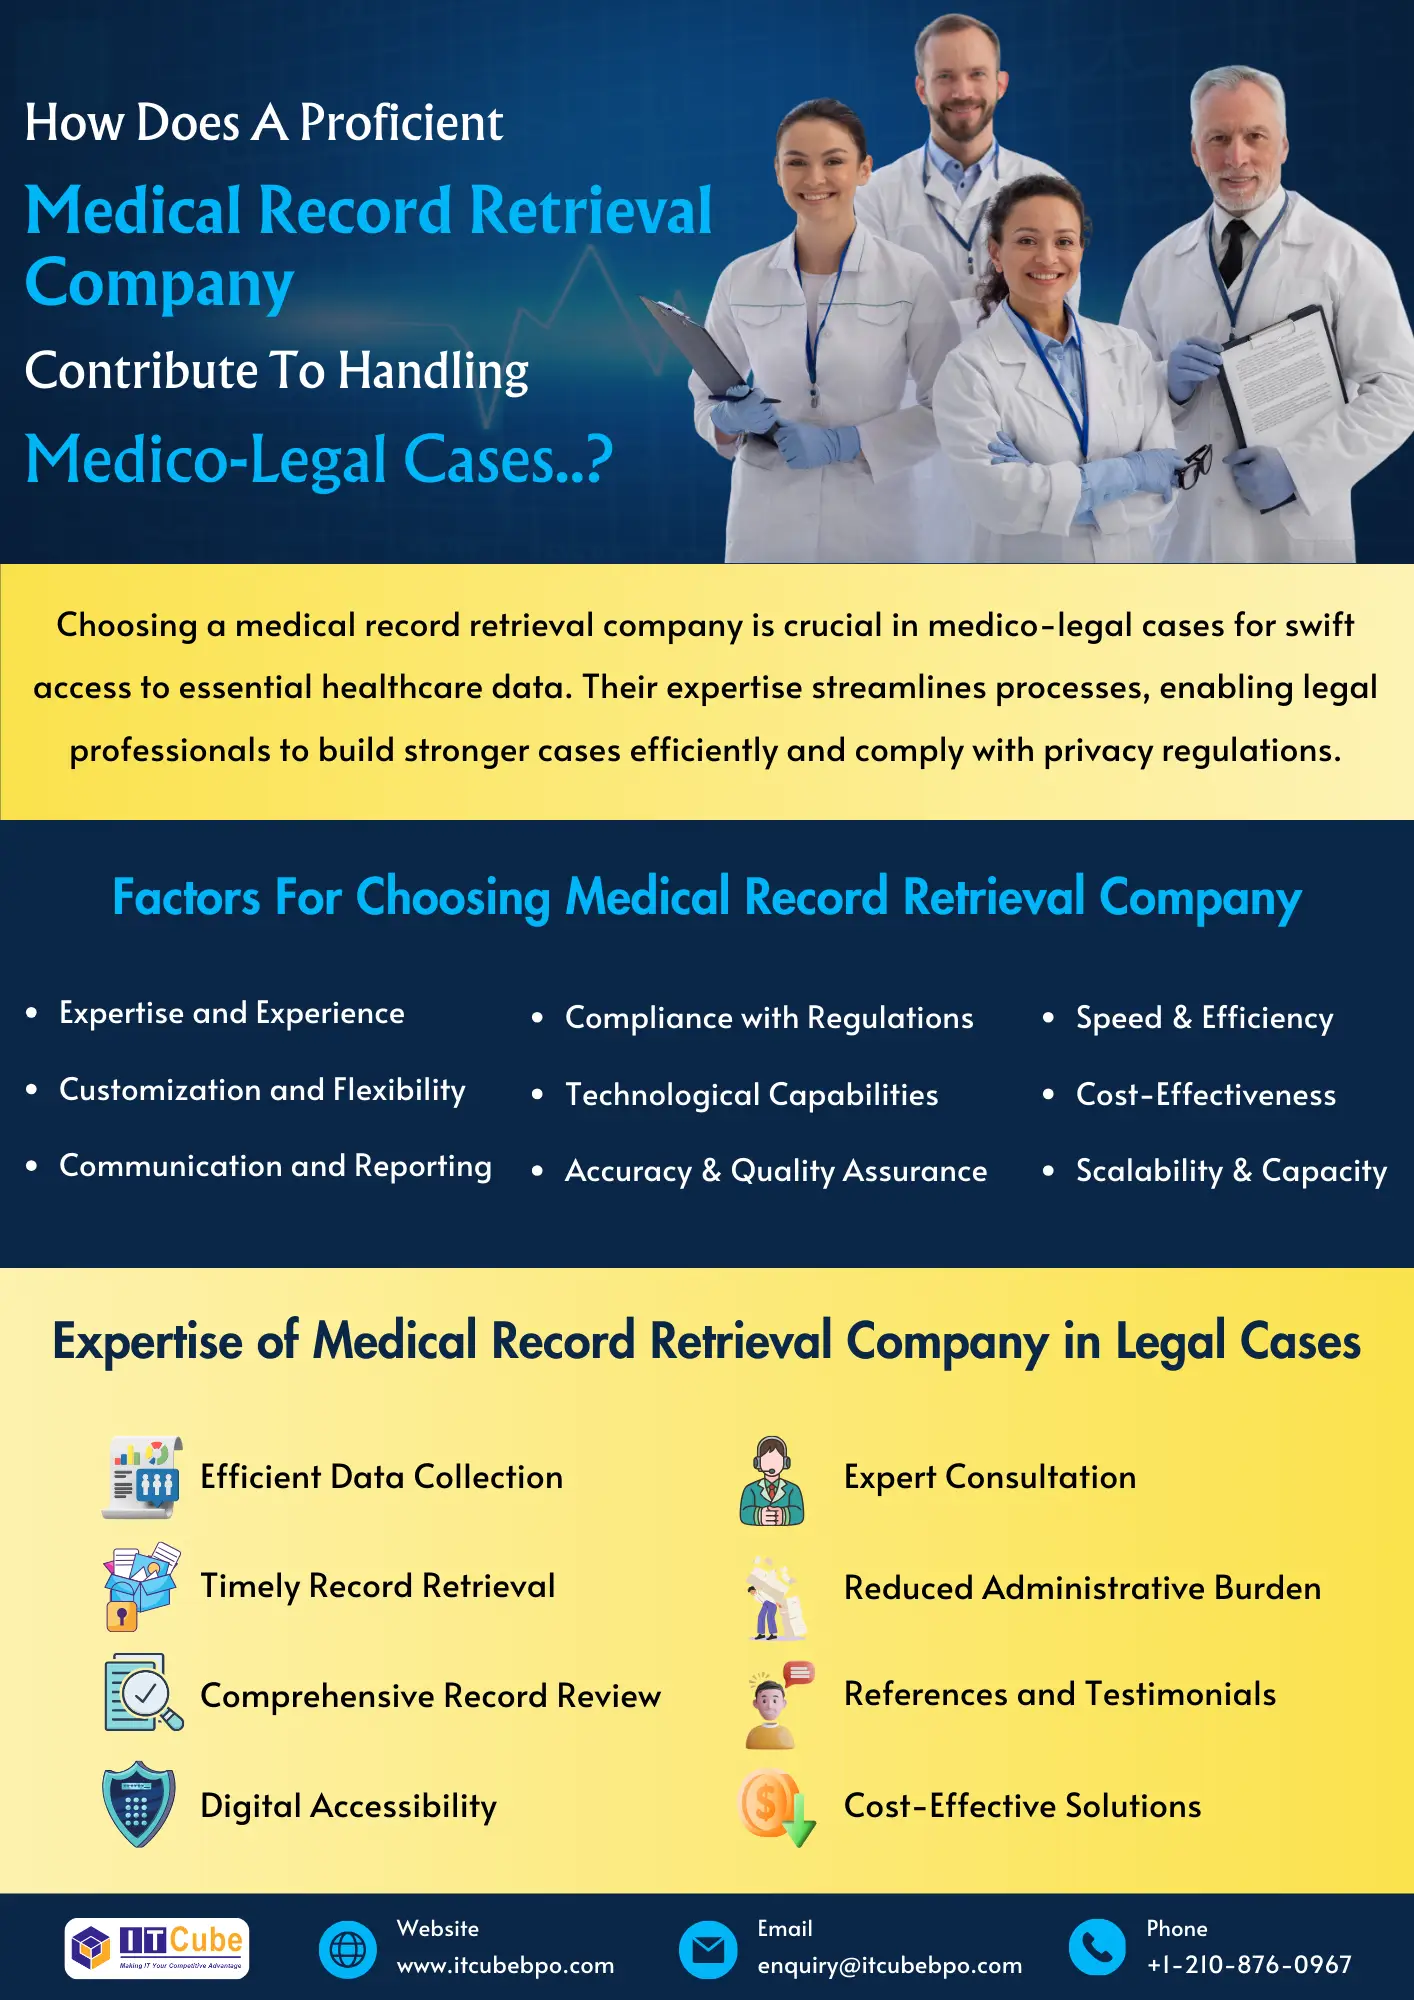 how-does-a-proficient-medical-record-retrieval-company-contribute-to-handling-medico-legal-cases Image